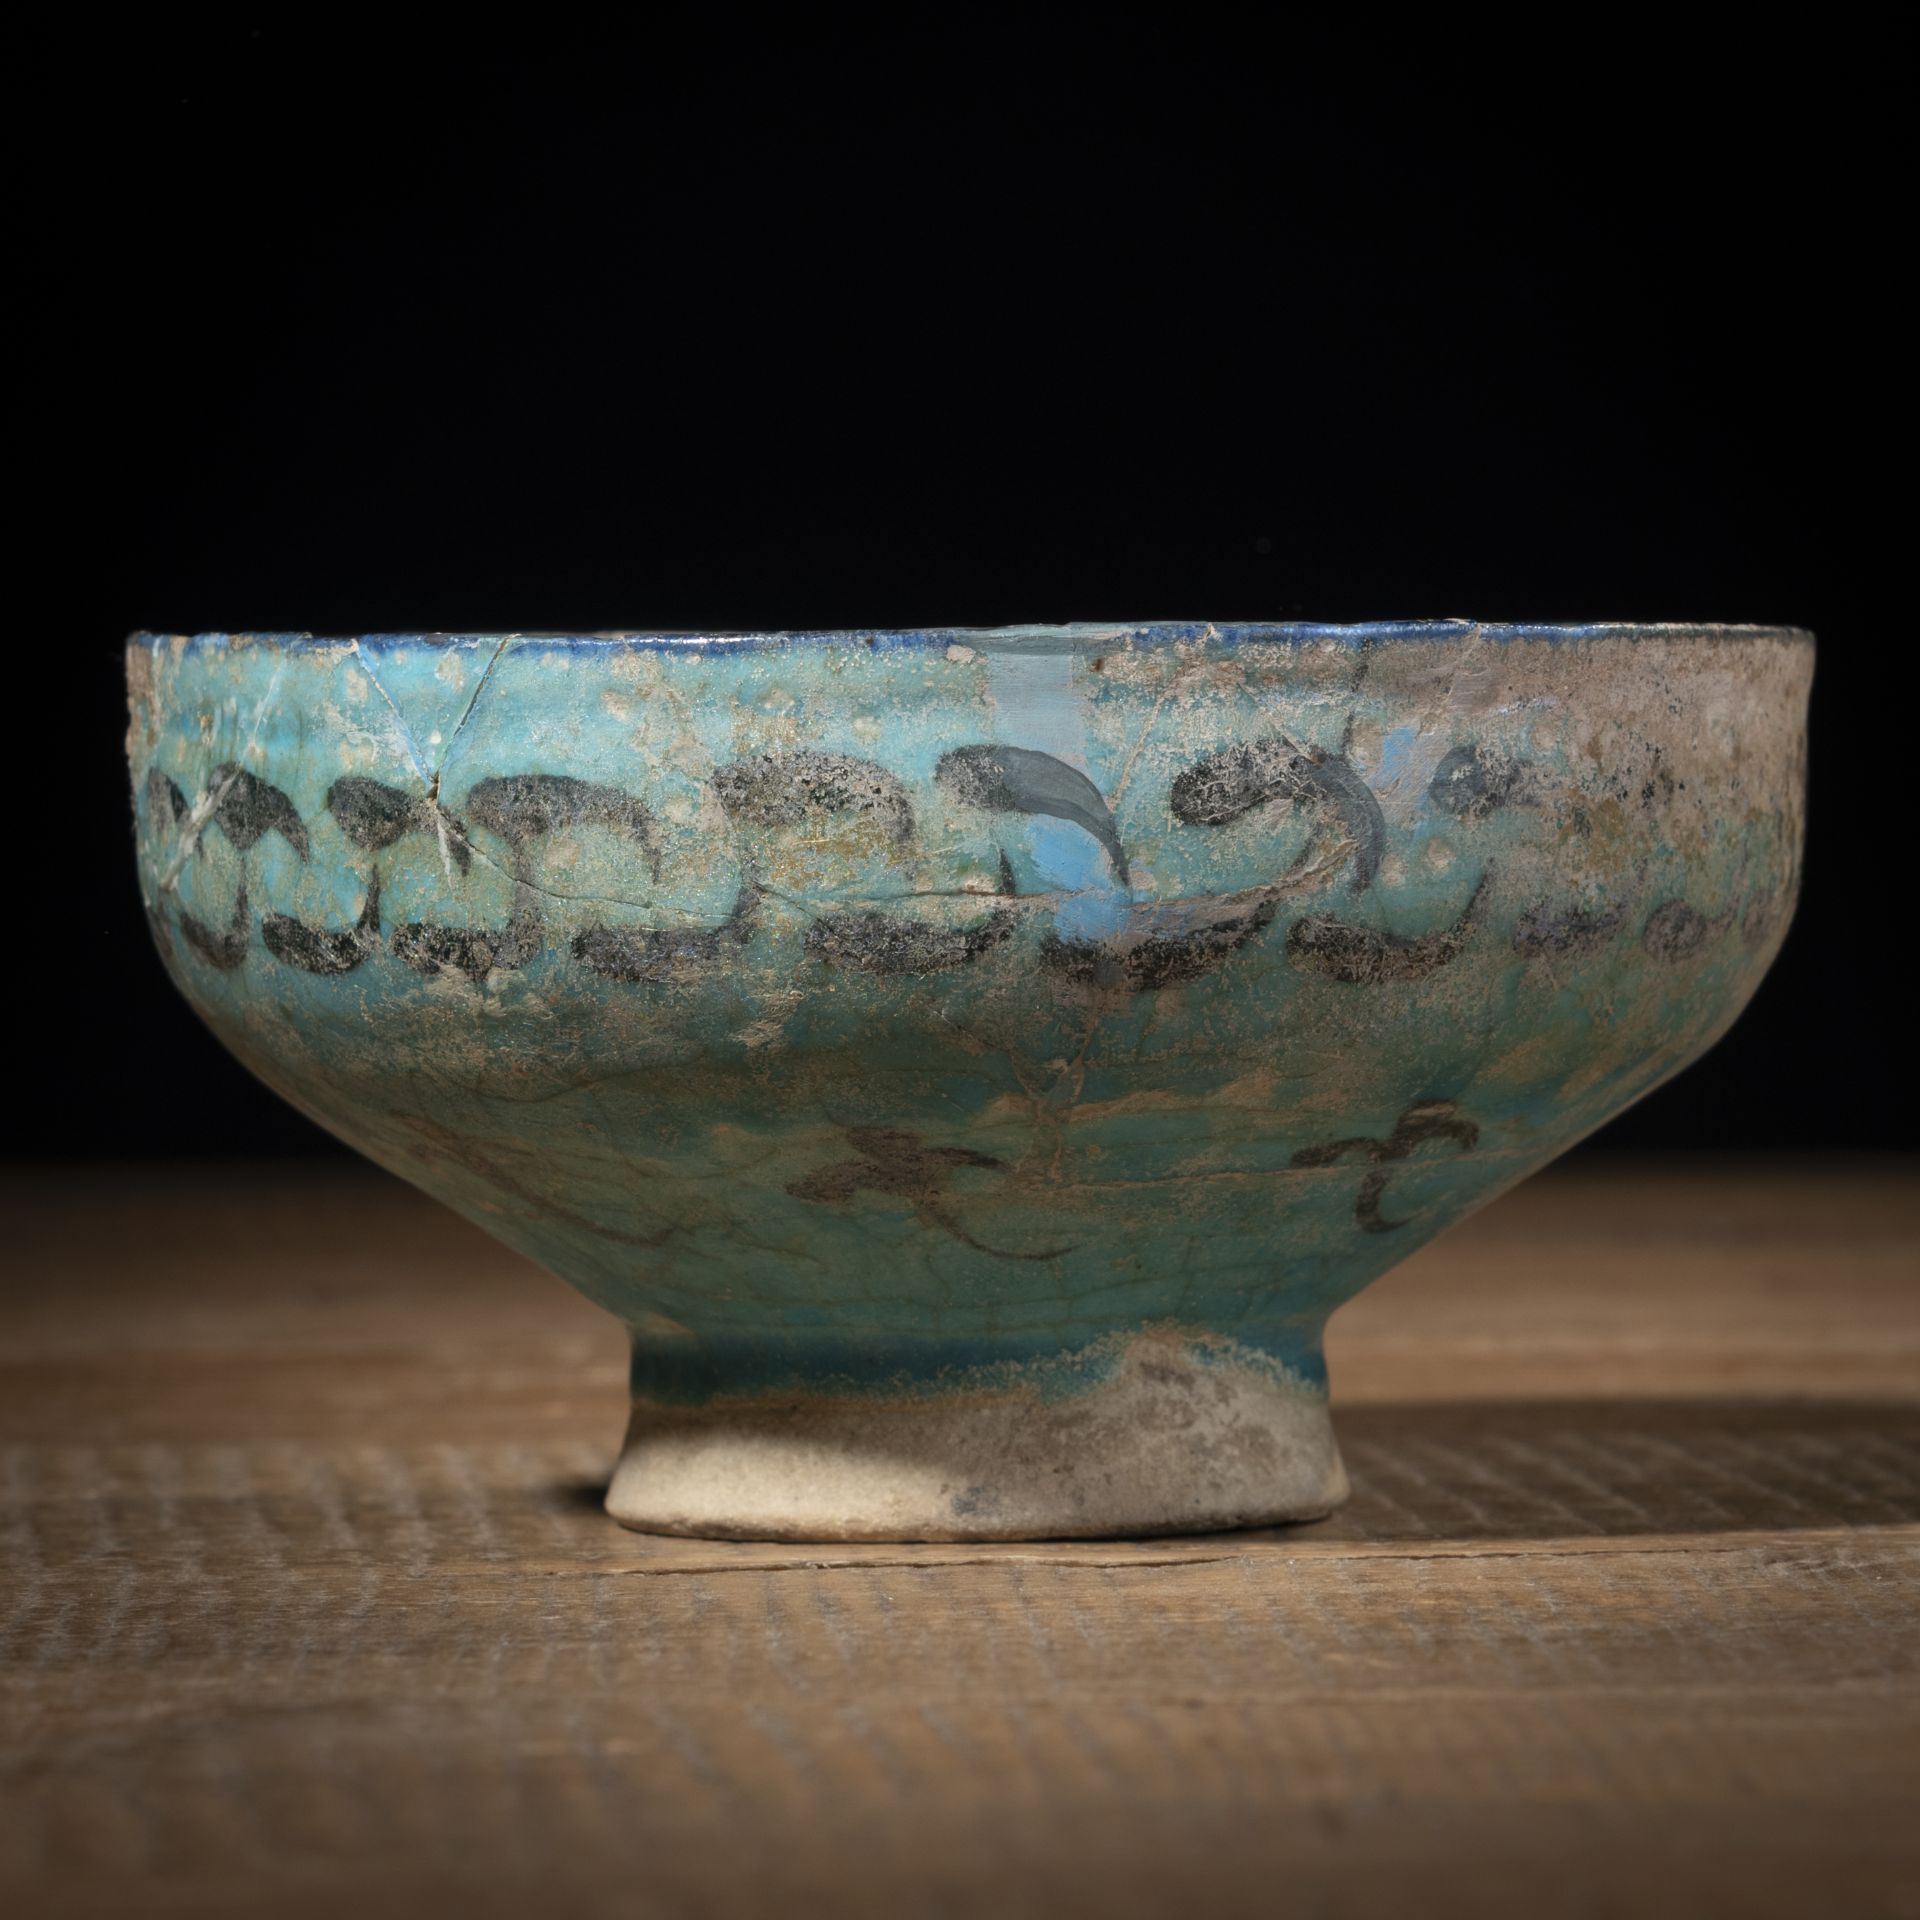 A PETROL-GLAZED CERAMIC BOWL WITH ABSTRACT DECORATION AND INSCRIPTION